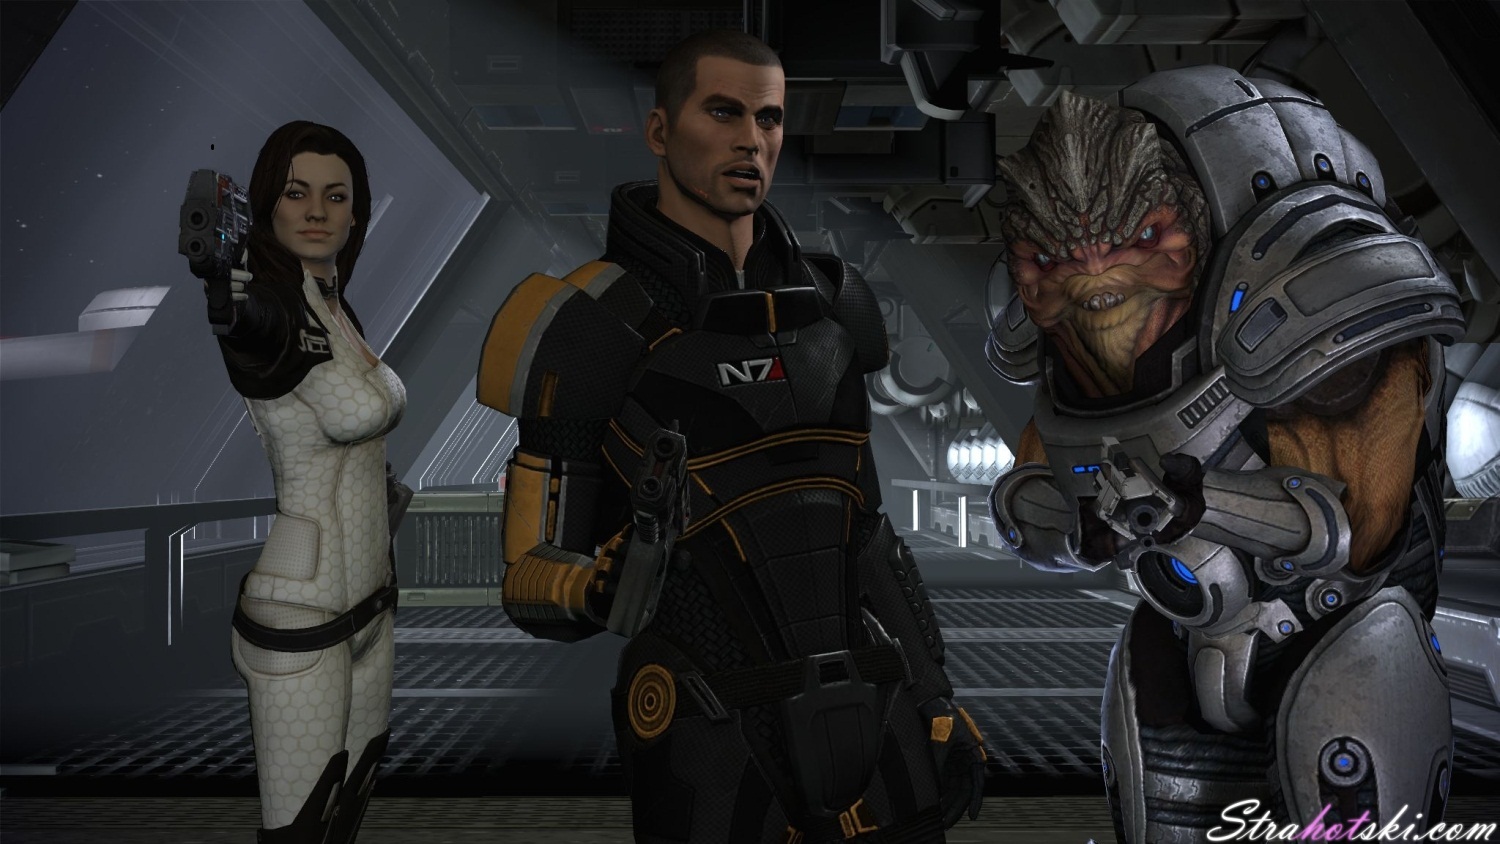 games for mac download mass effect